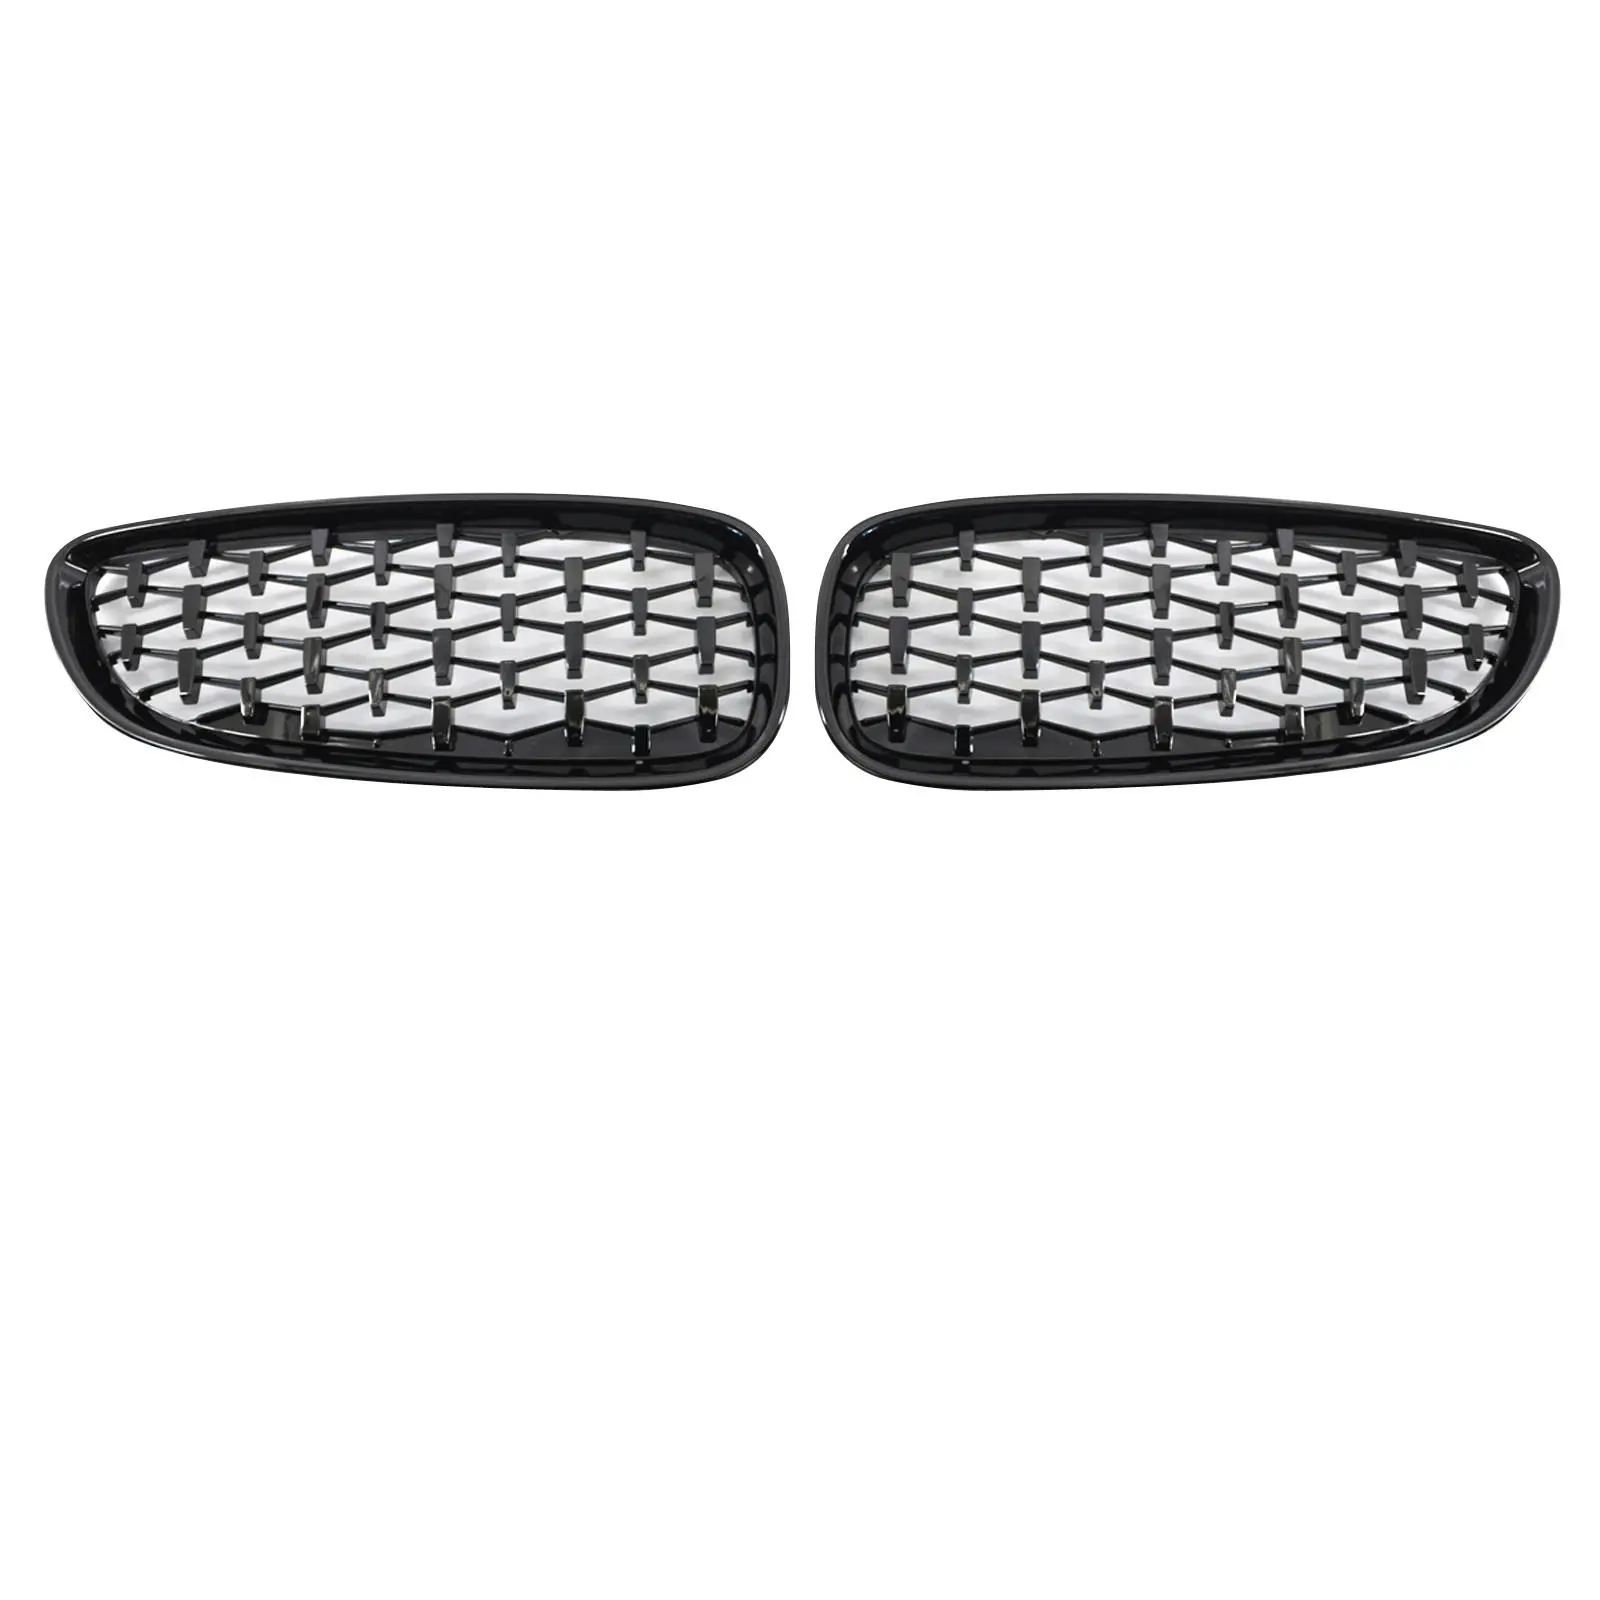 51137181547 Grills Mesh Grille for Z4 E89 Car High Performance